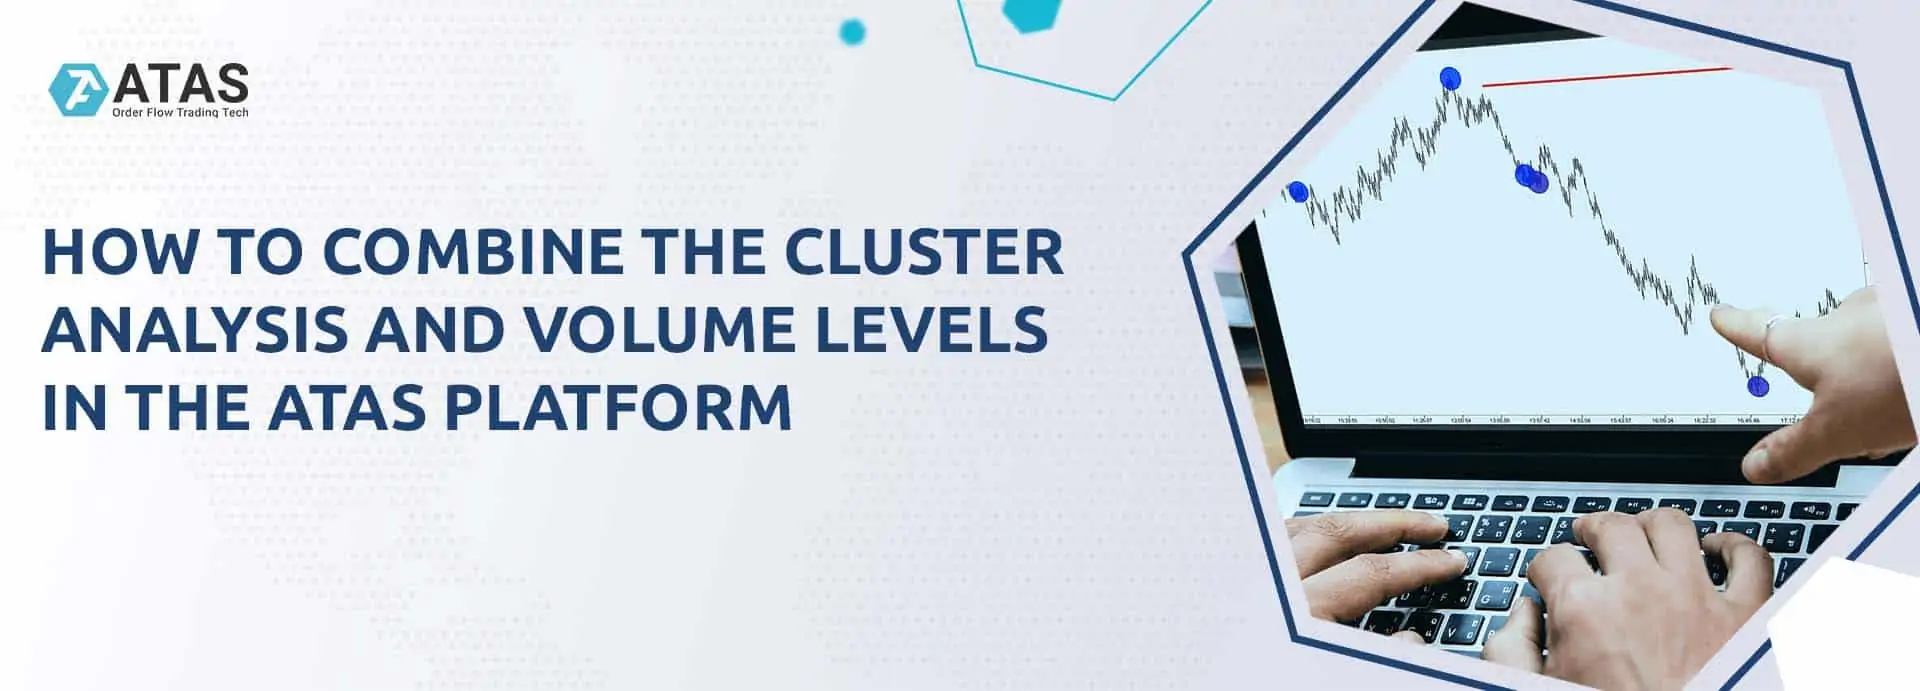 How to combine the cluster Analysis and volume levels In the atas platform